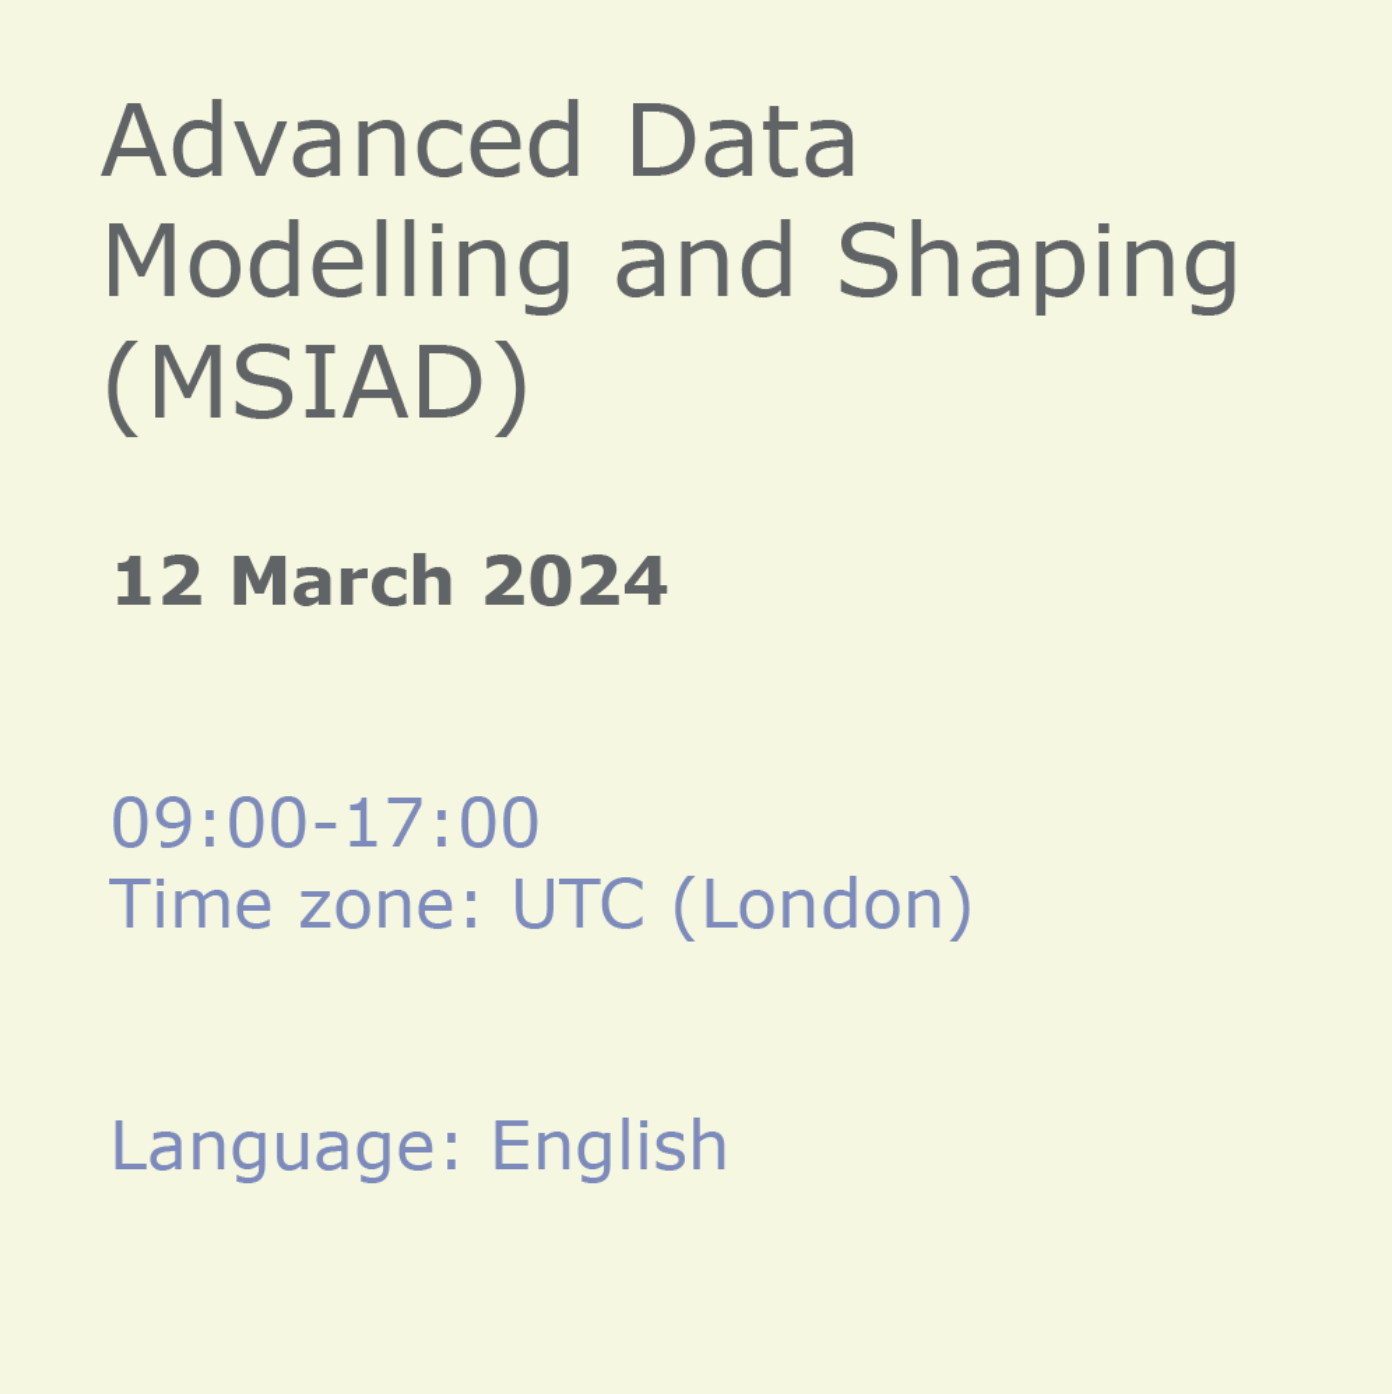 Advanced Data Modelling and Shaping (MSIAD)